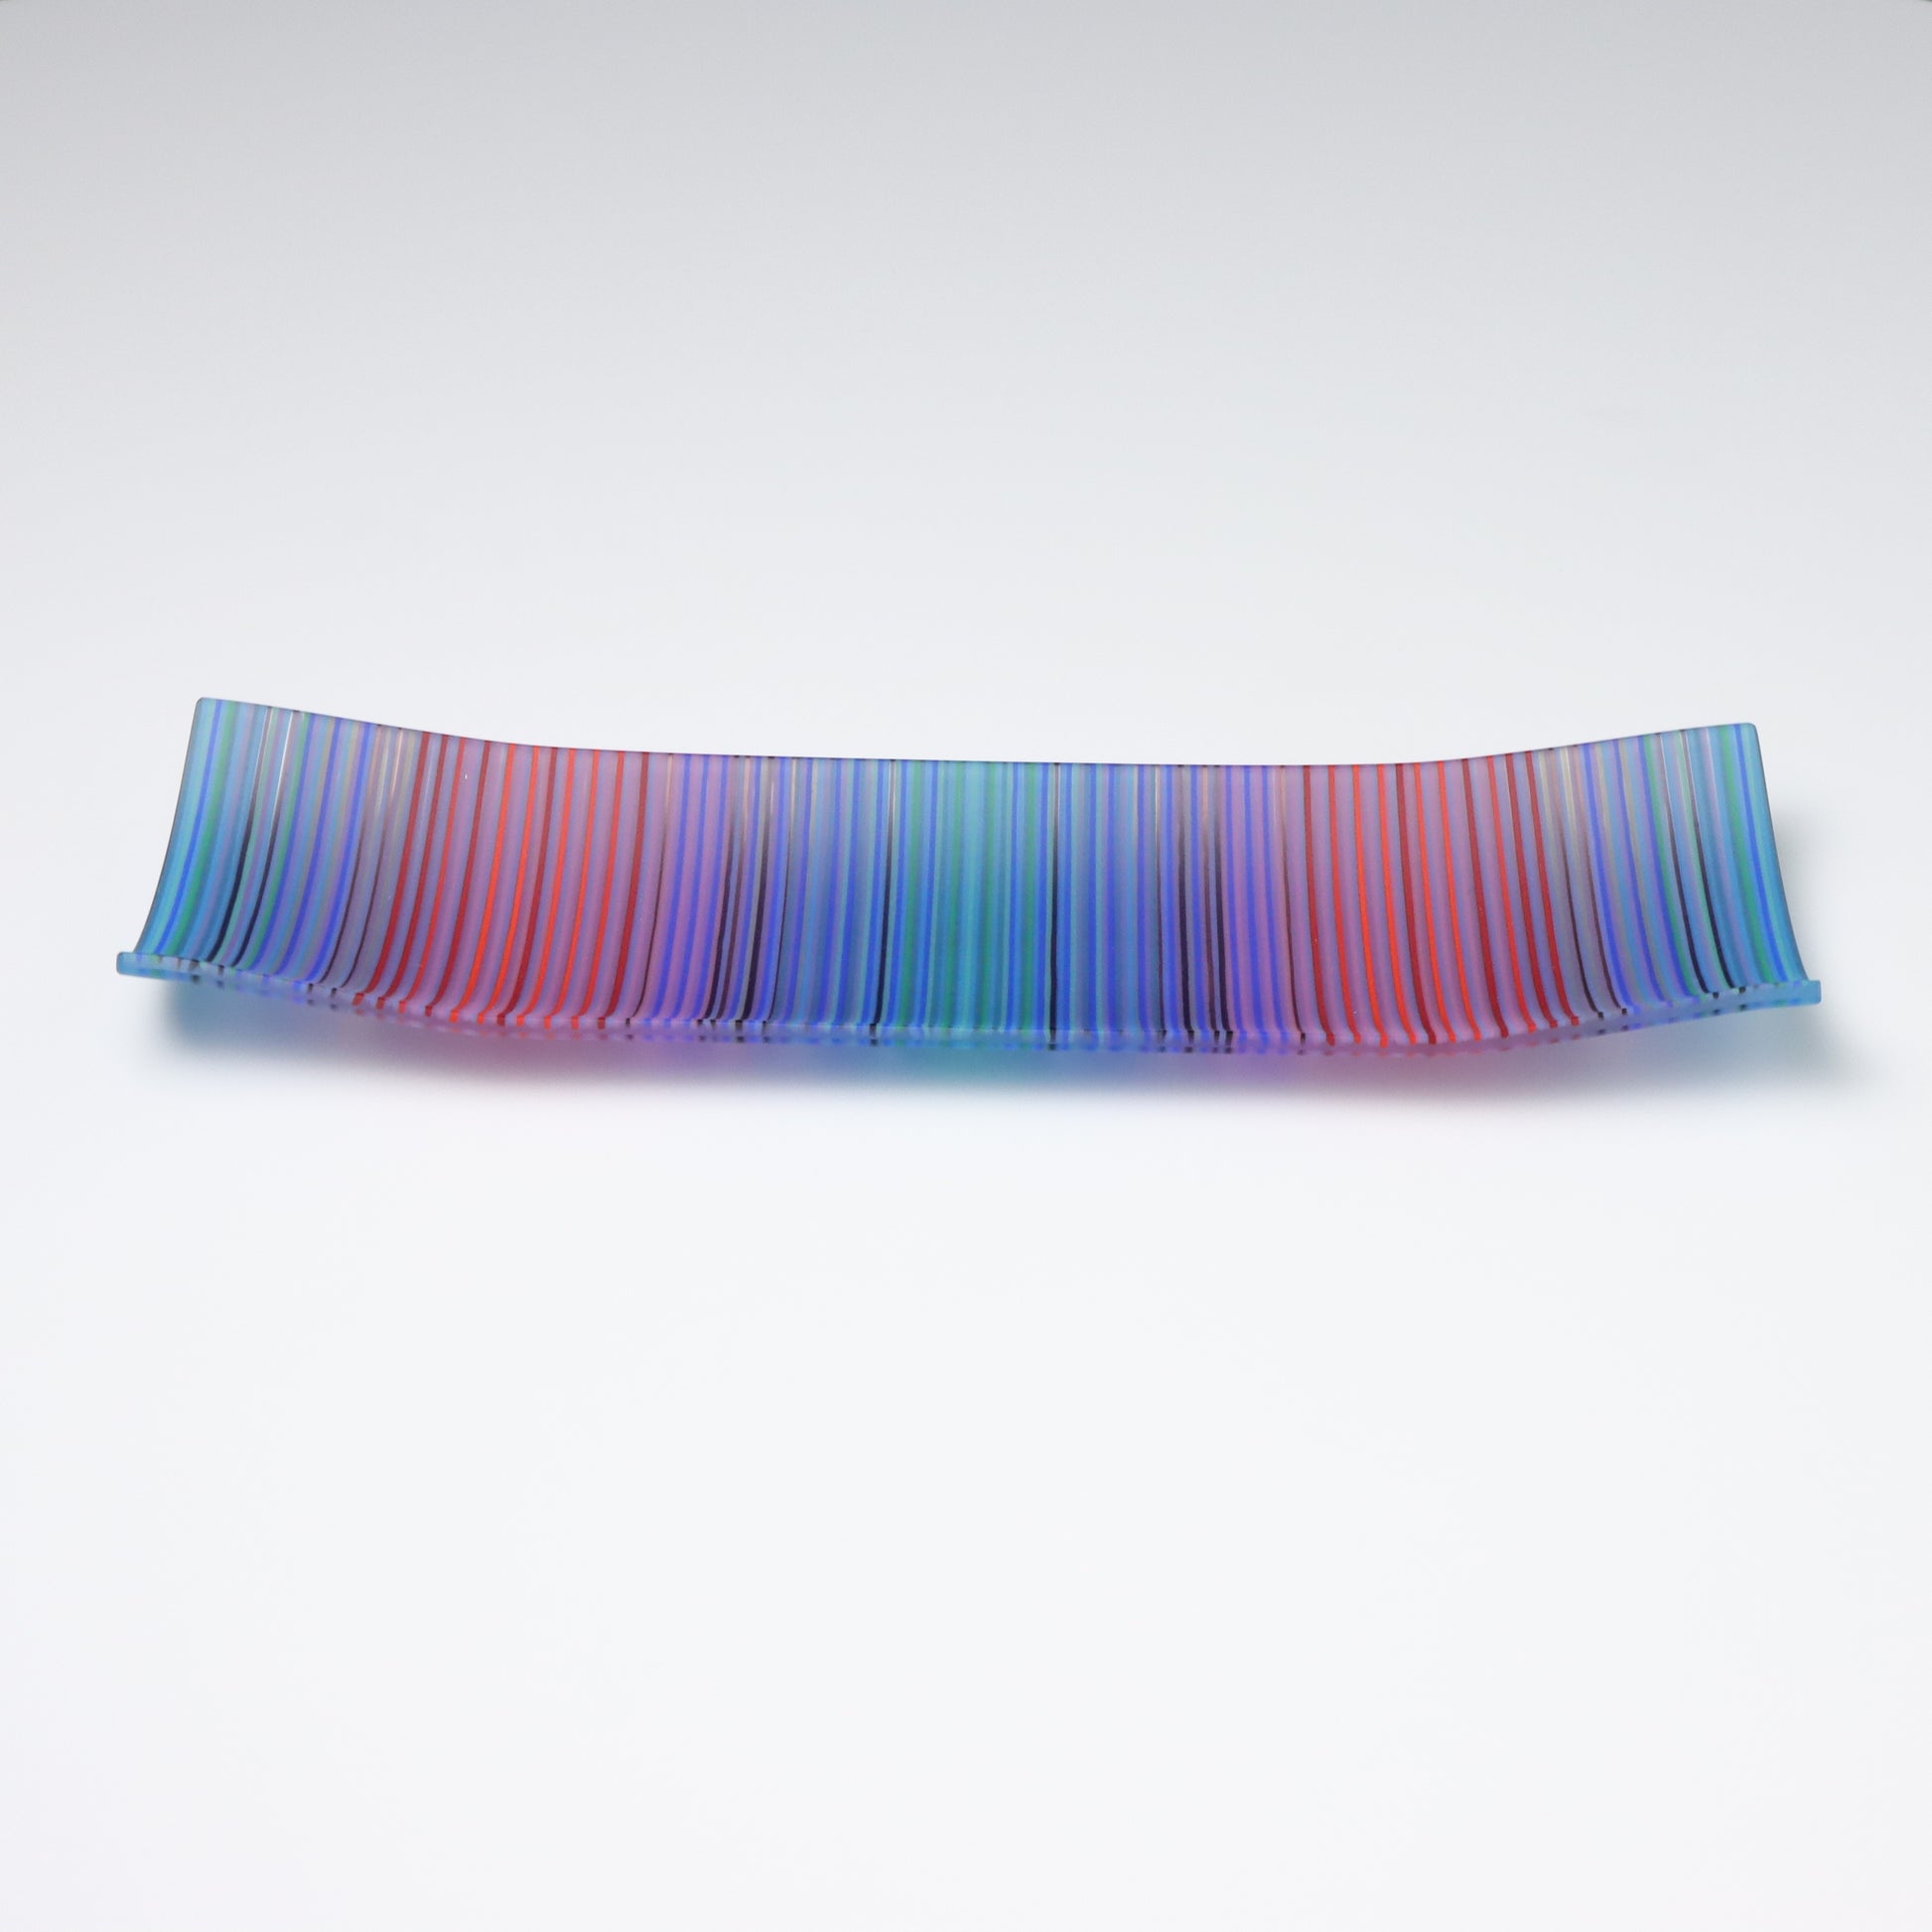 A rectangular ColourWave Glass fused glass plate displaying a vibrant array of vertical stripes in shades of blue, green, red, and purple. The plate exhibits a subtle upward curve at each corner, lending it a sophisticated and contemporary appearance. Its smooth surface catches and reflects the light, showcasing the rich colours and fine strands of glass used to create this piece. Positioned against a white backdrop, the plate’s vivid colours and stylish design are prominently featured.